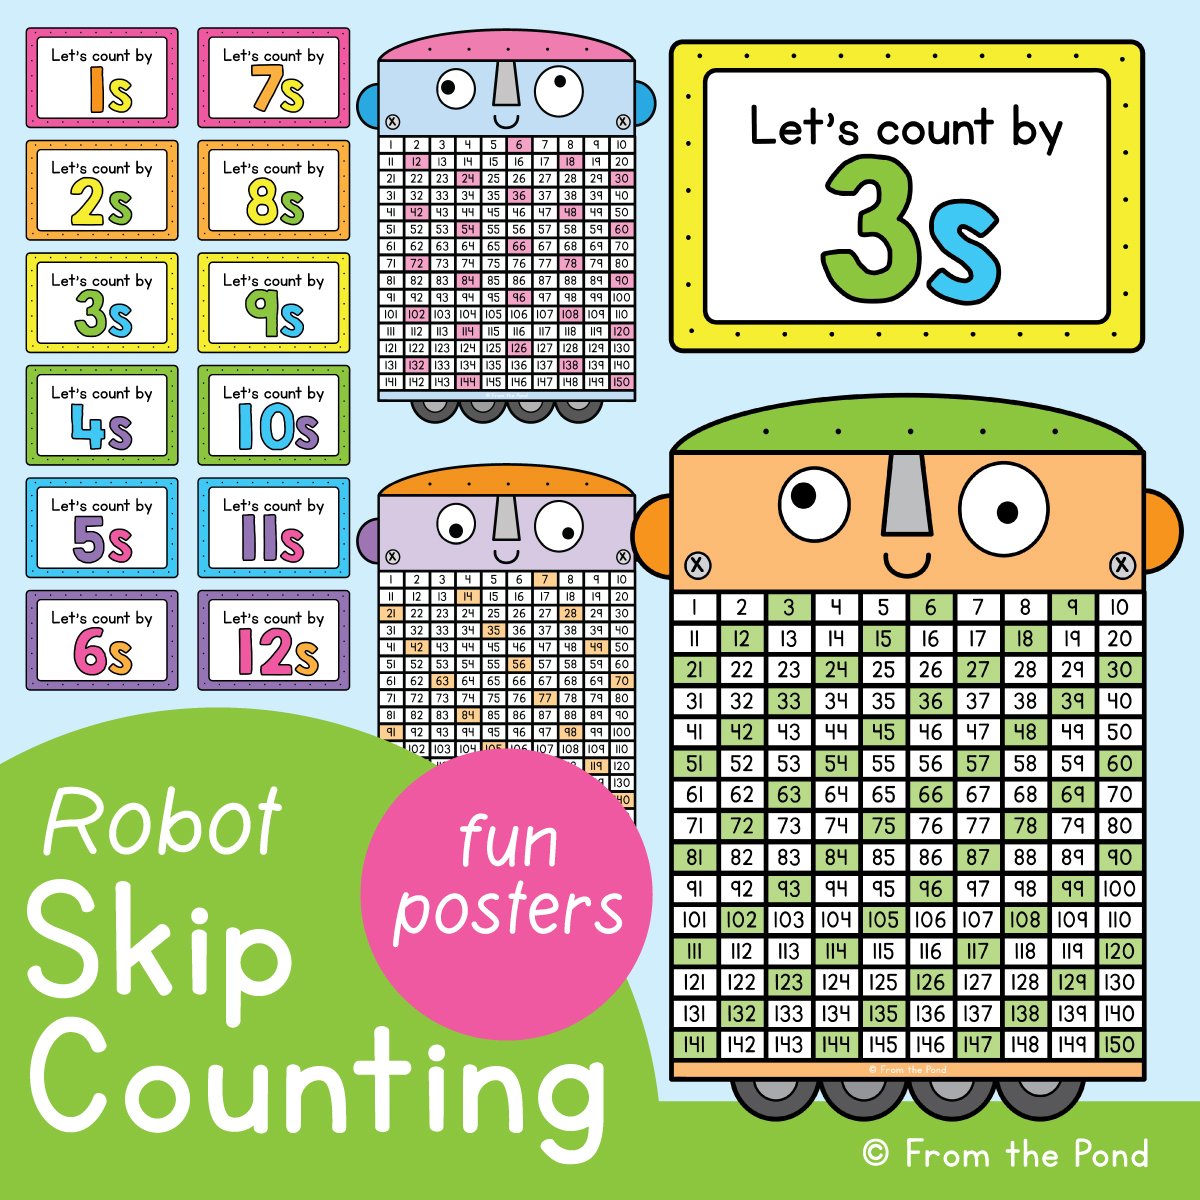 Robot Skip Counting Posters